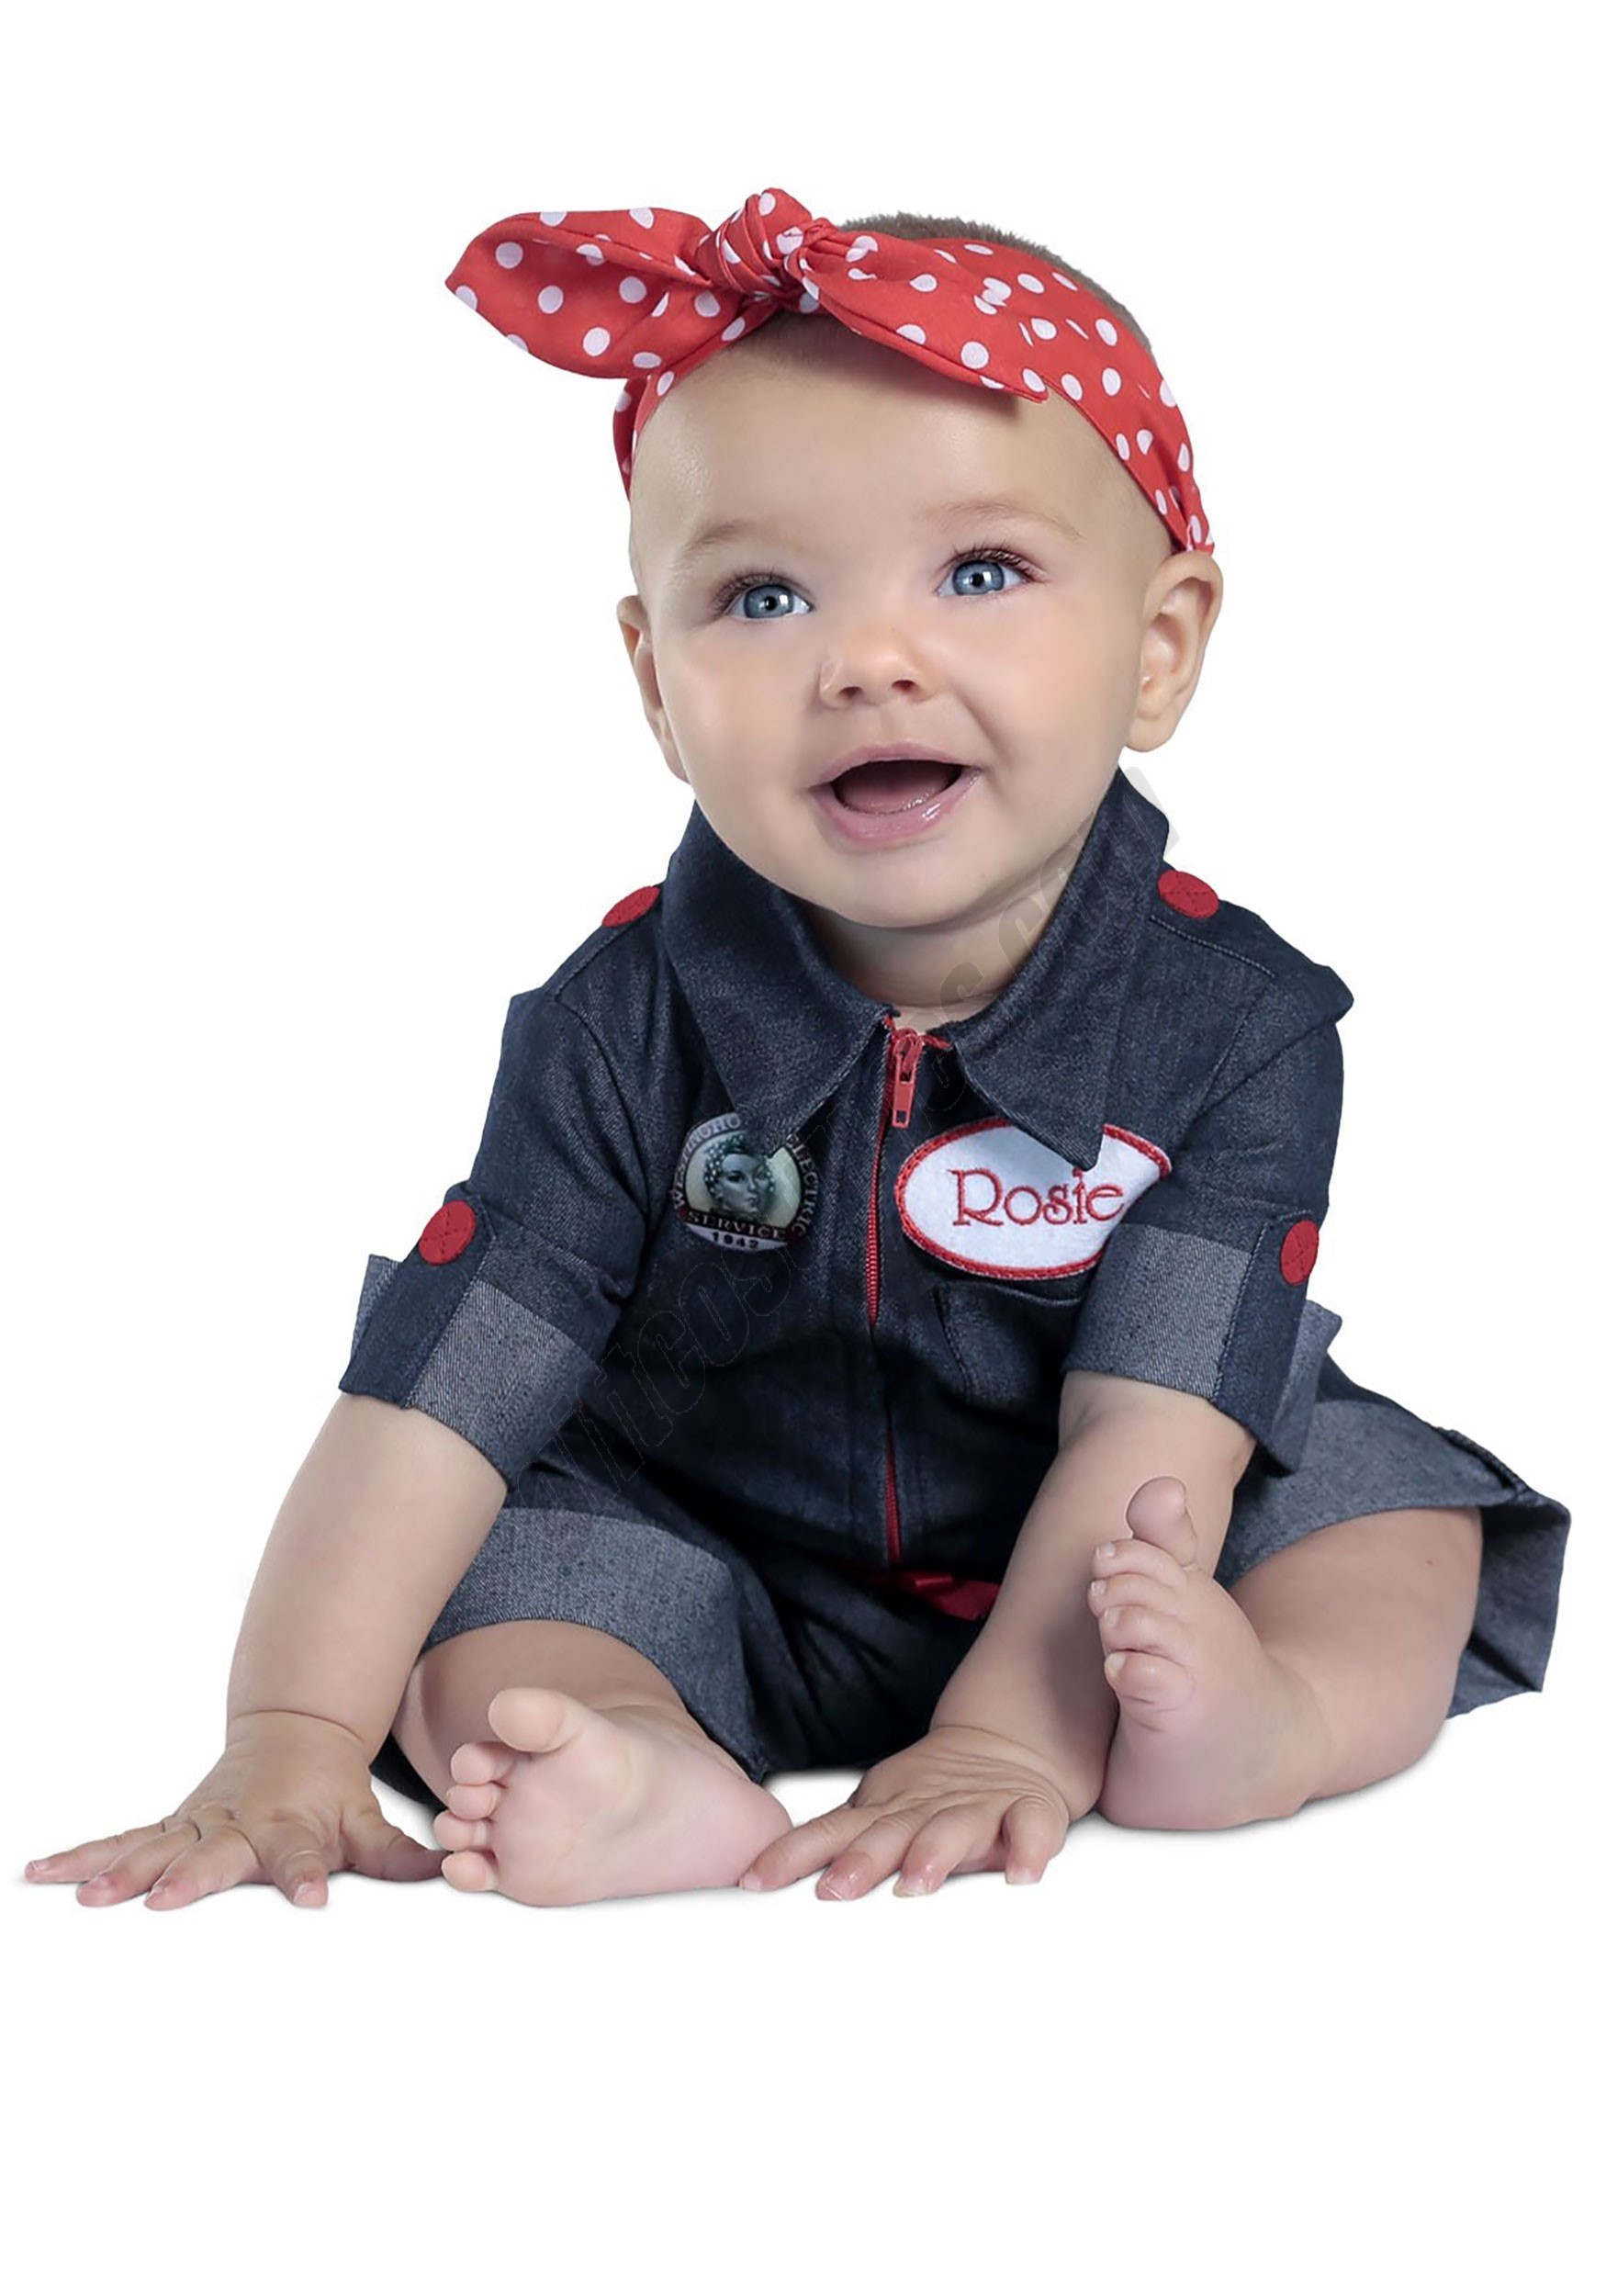 Rosie the Riveter Costume For baby Promotions - Rosie the Riveter Costume For baby Promotions